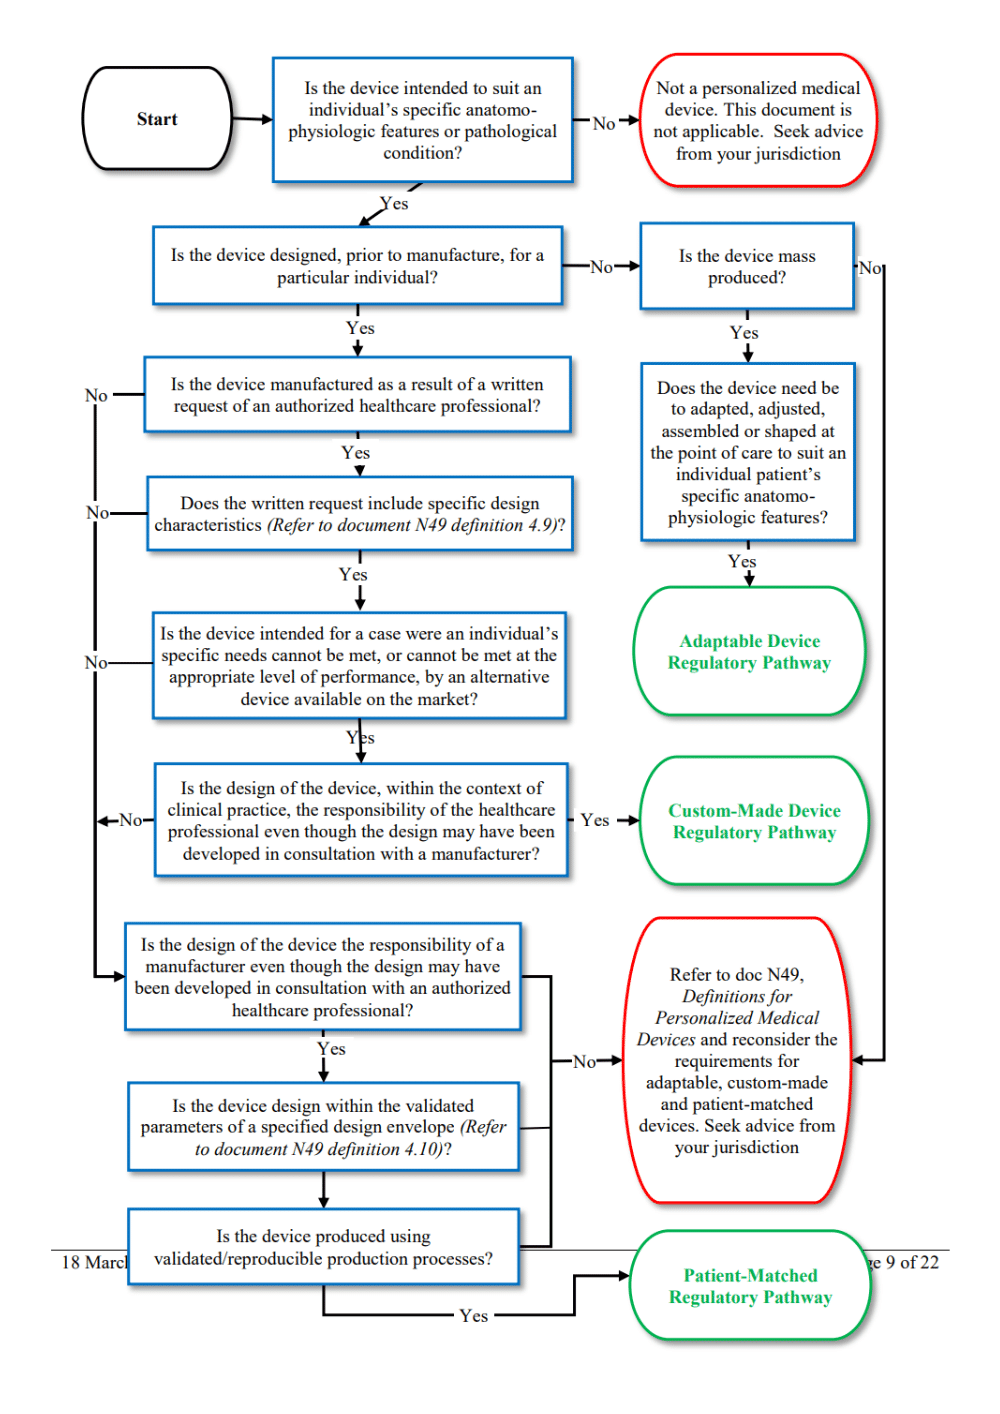 IMDRF's decision tree concerning the differences between custom-made, patient-adapted, and customizable devices